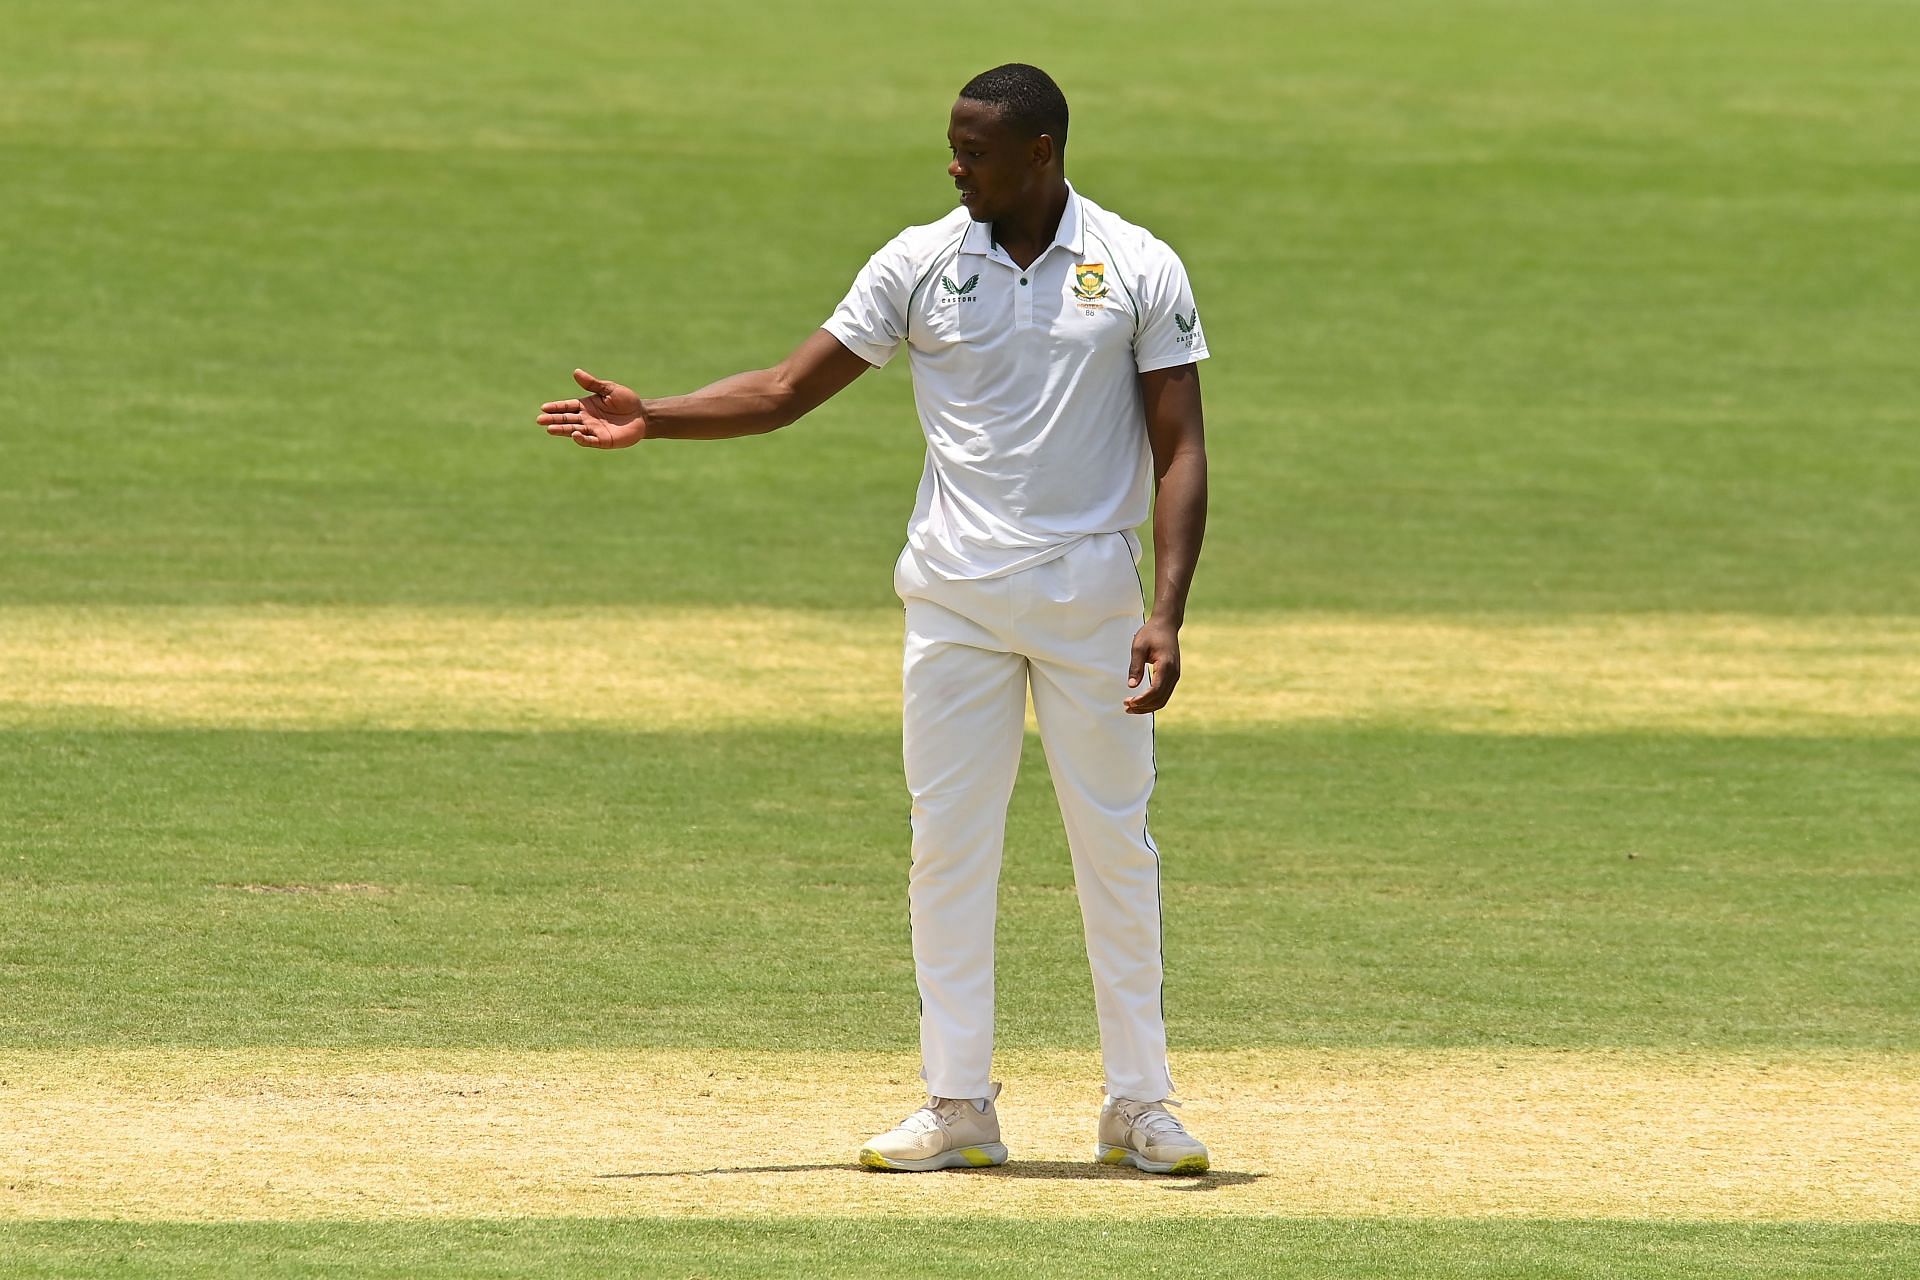 Kagiso Rabada will spearhead the South African bowling attack